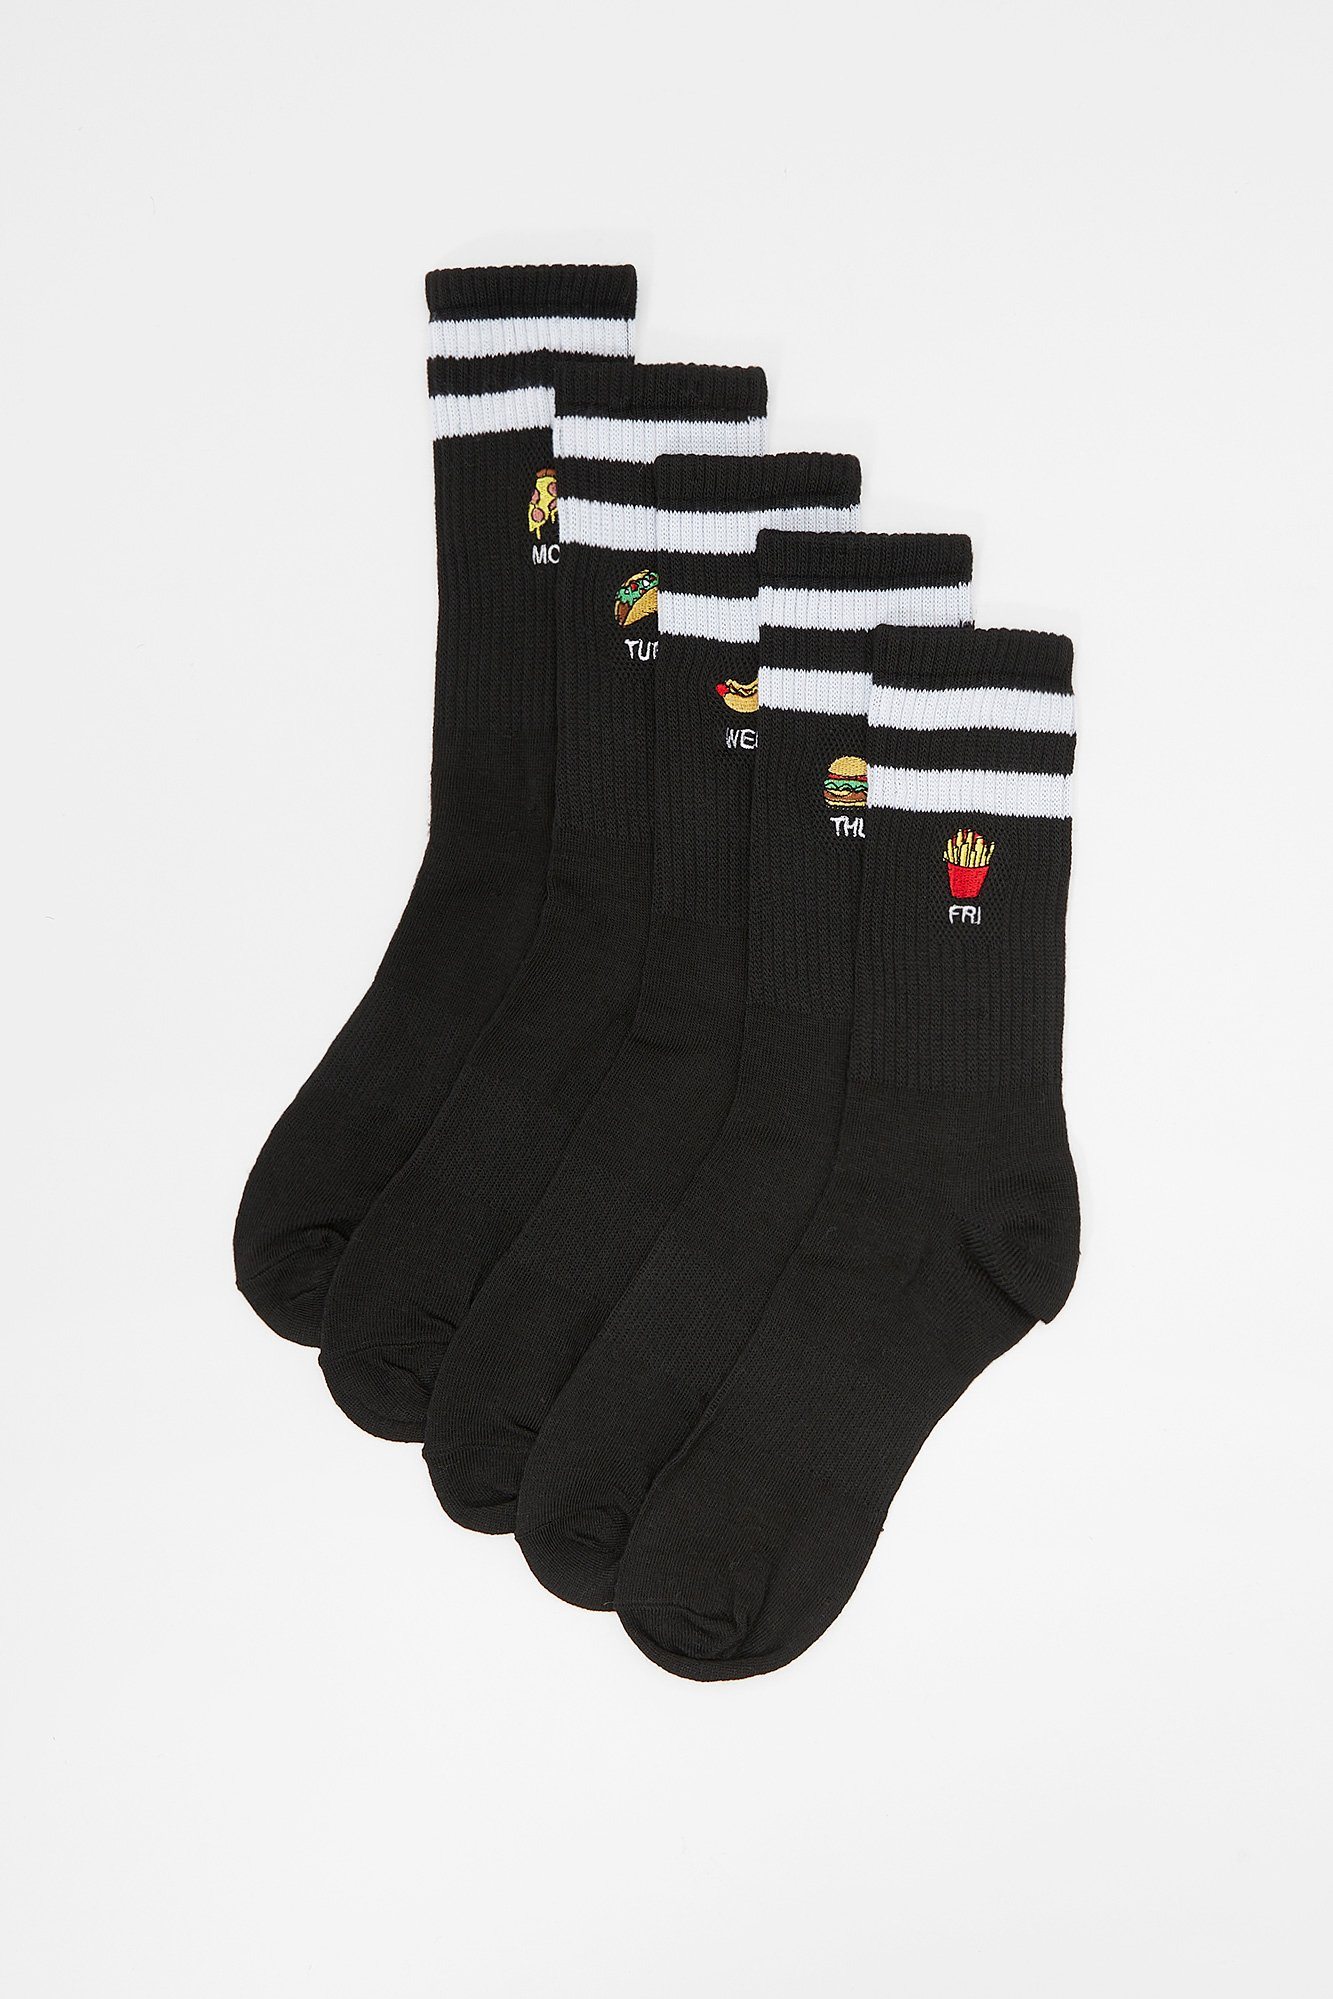 Image of West49 Youth 5-Pack Fast Food Crew Socks